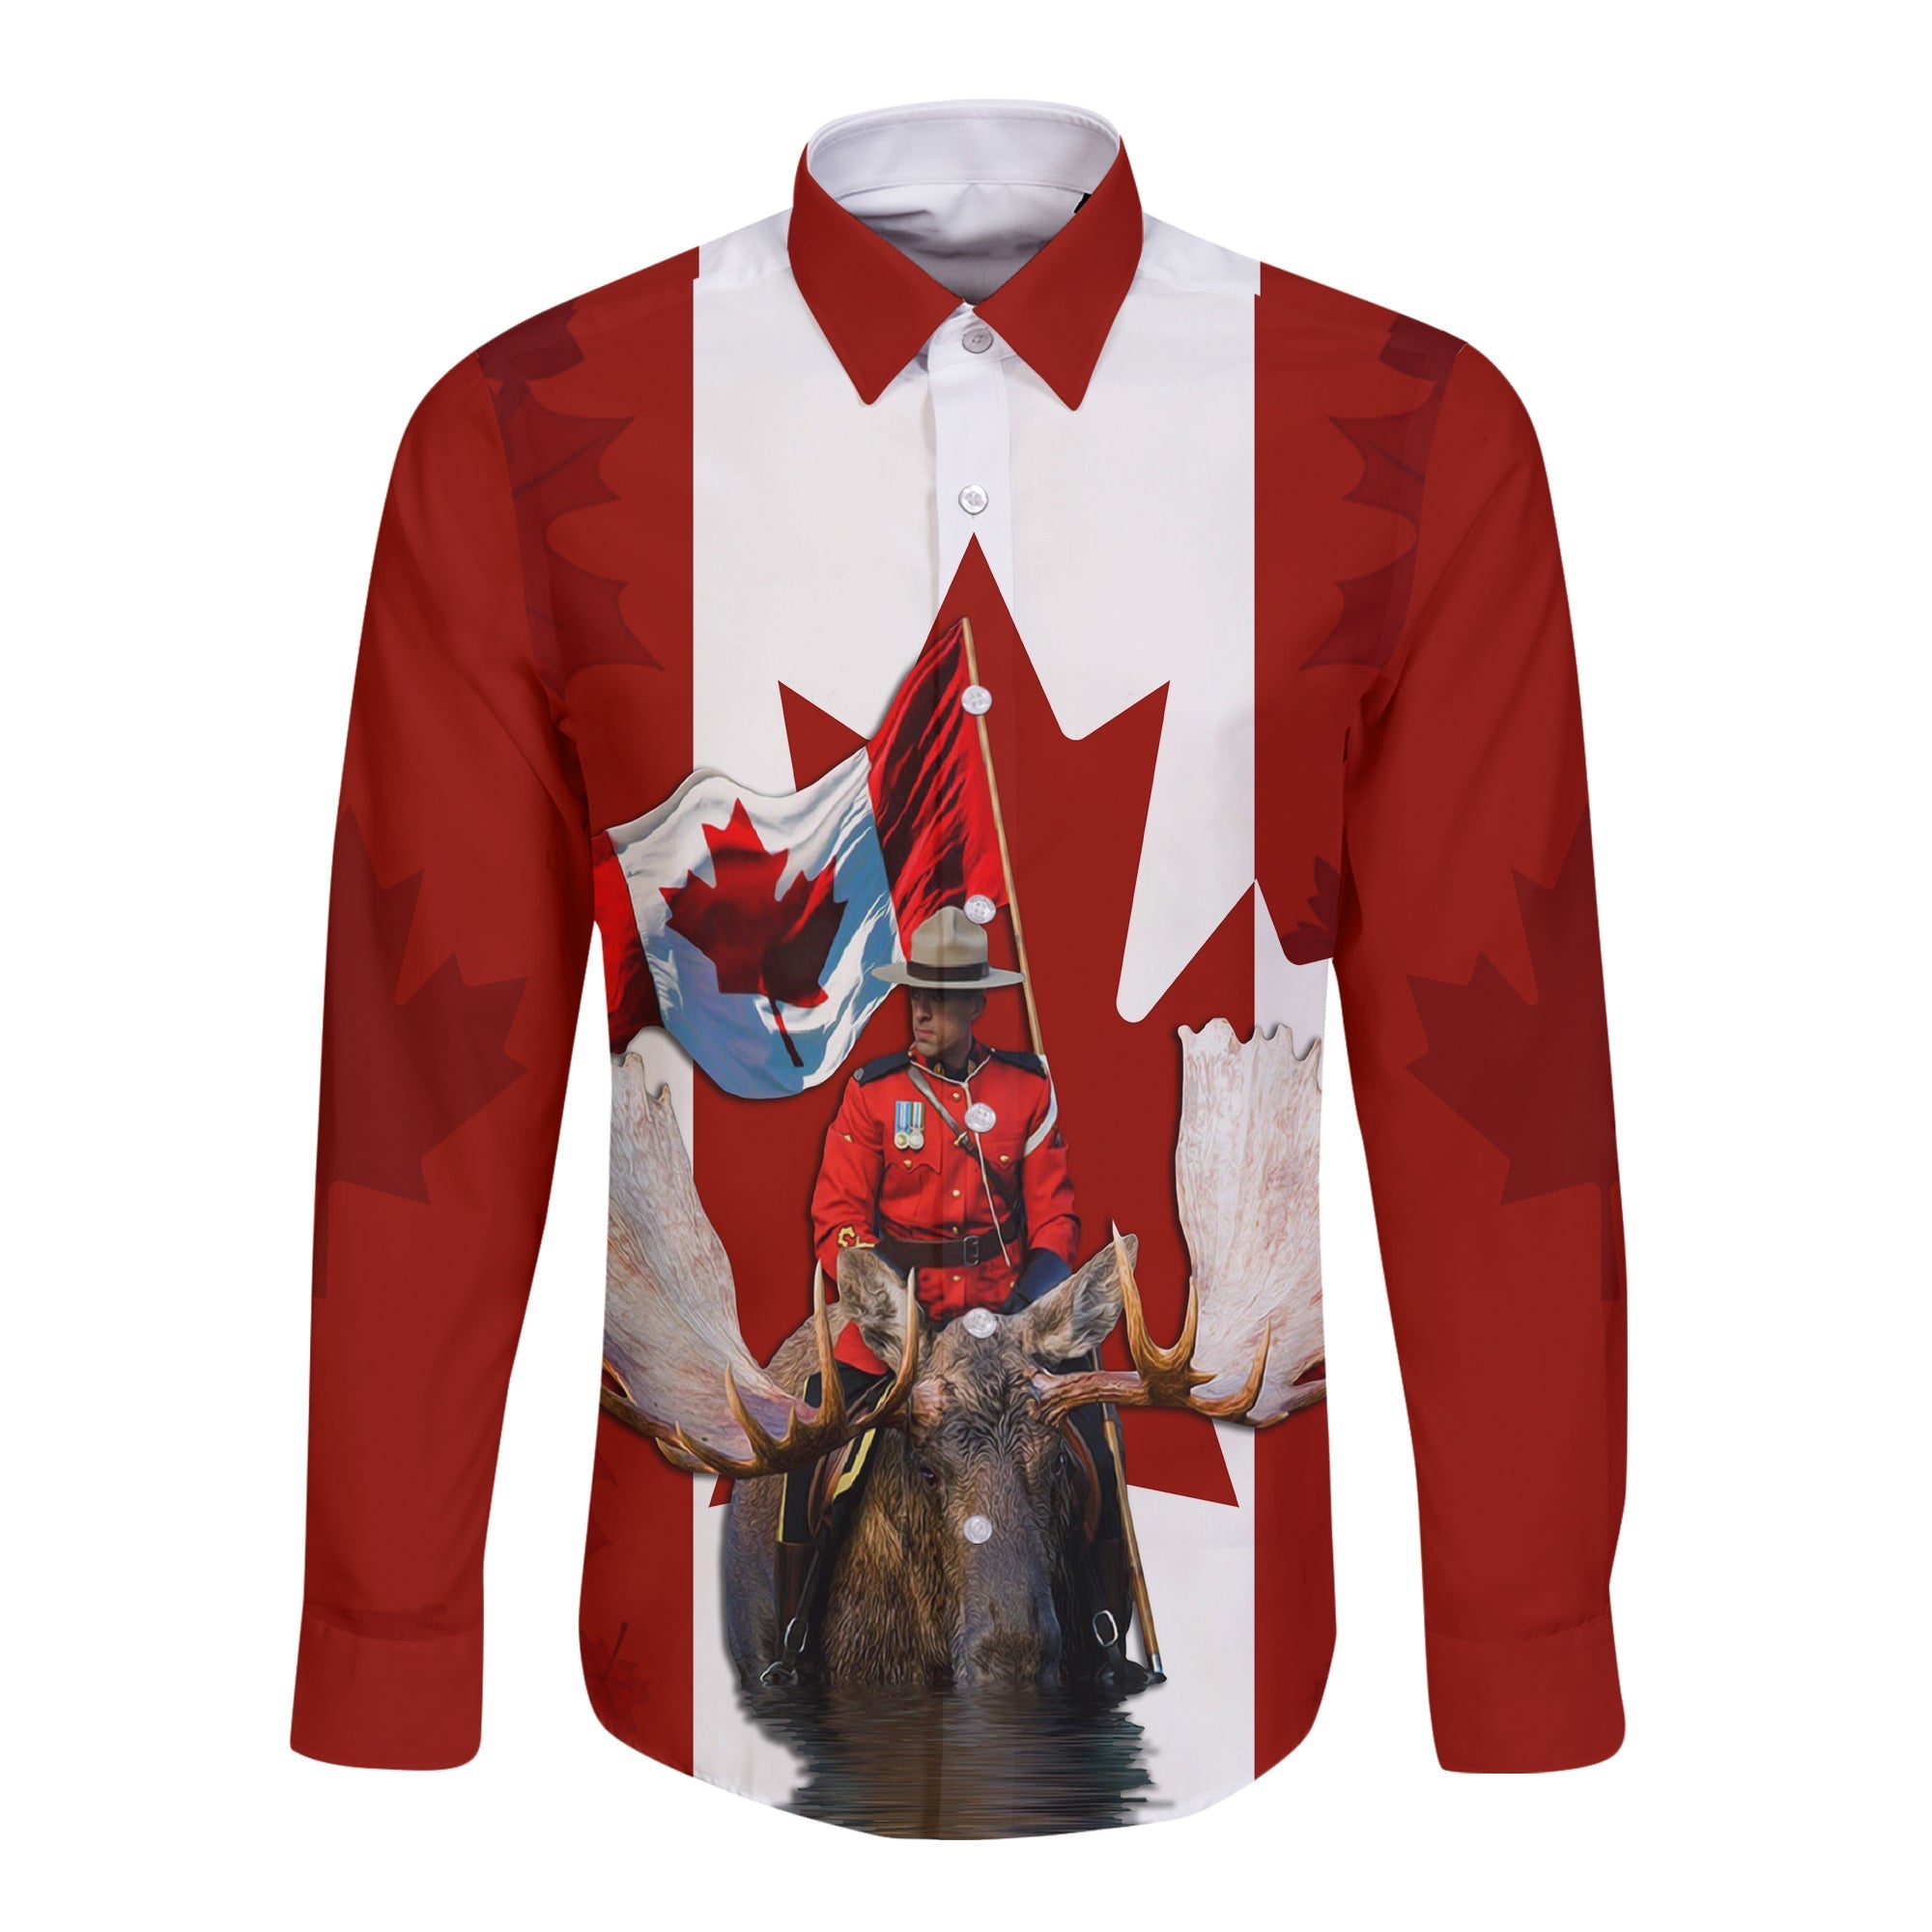 canada-day-personalised-long-sleeves-button-shirt-mountie-on-moose